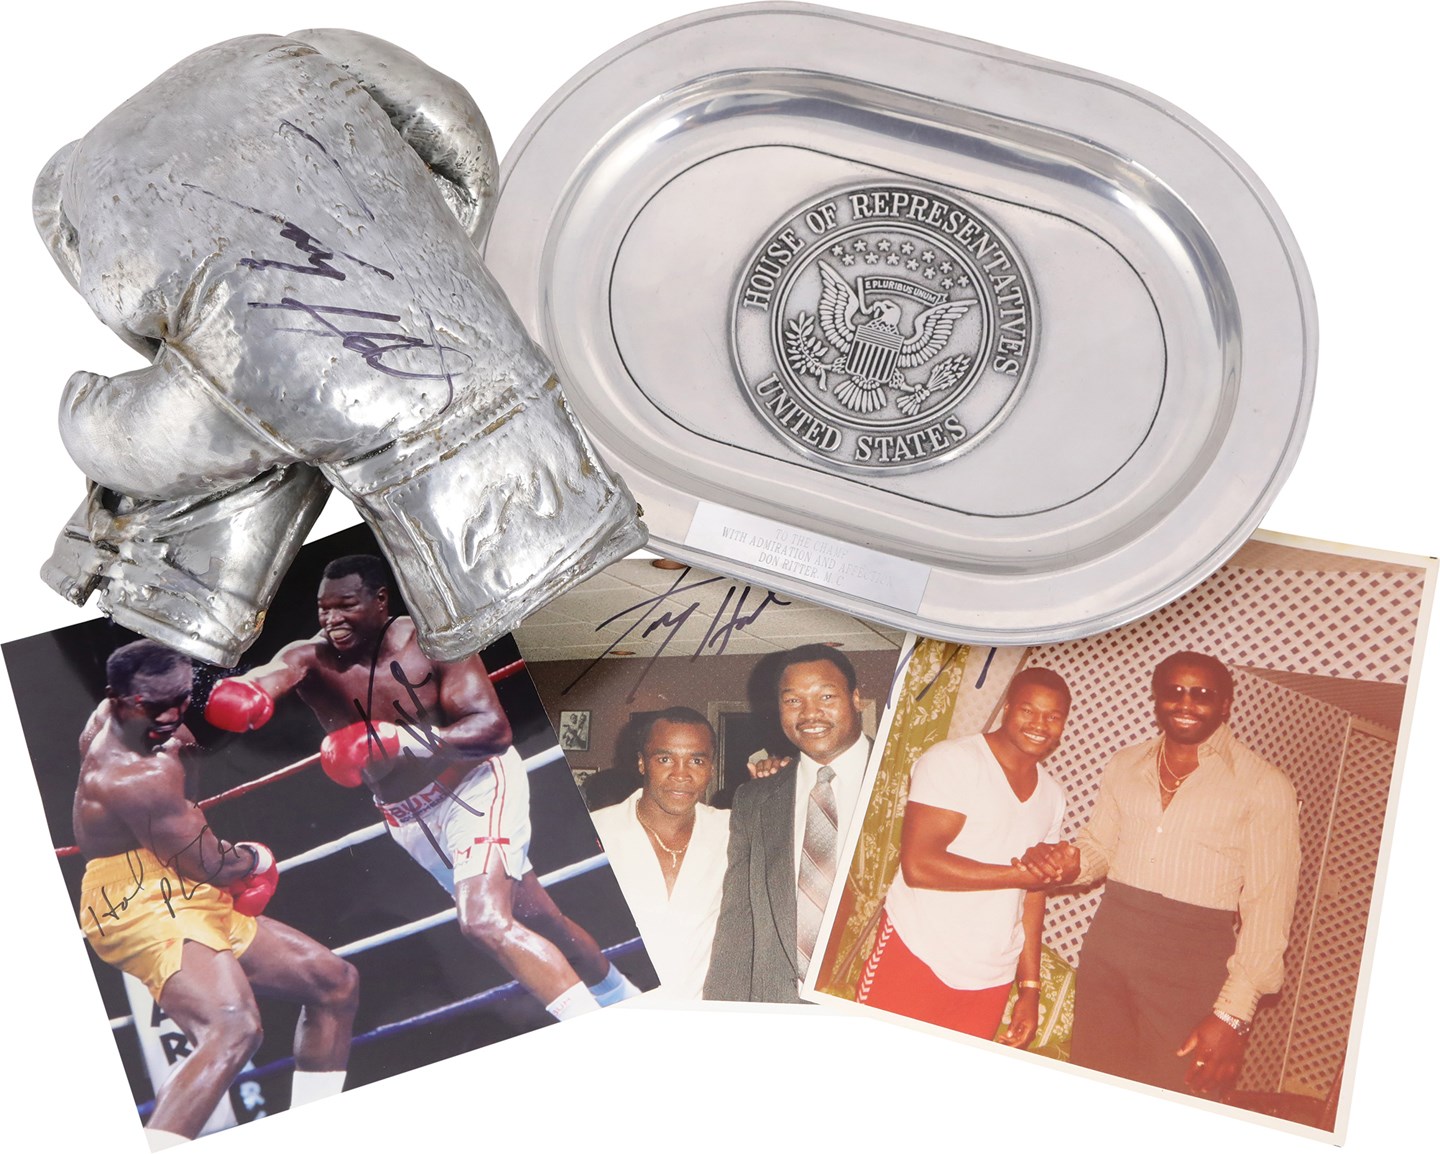 - Larry Holmes Collection Featuring "Bronzed" Fight Gloves and Personal Photo Album (21 Items)